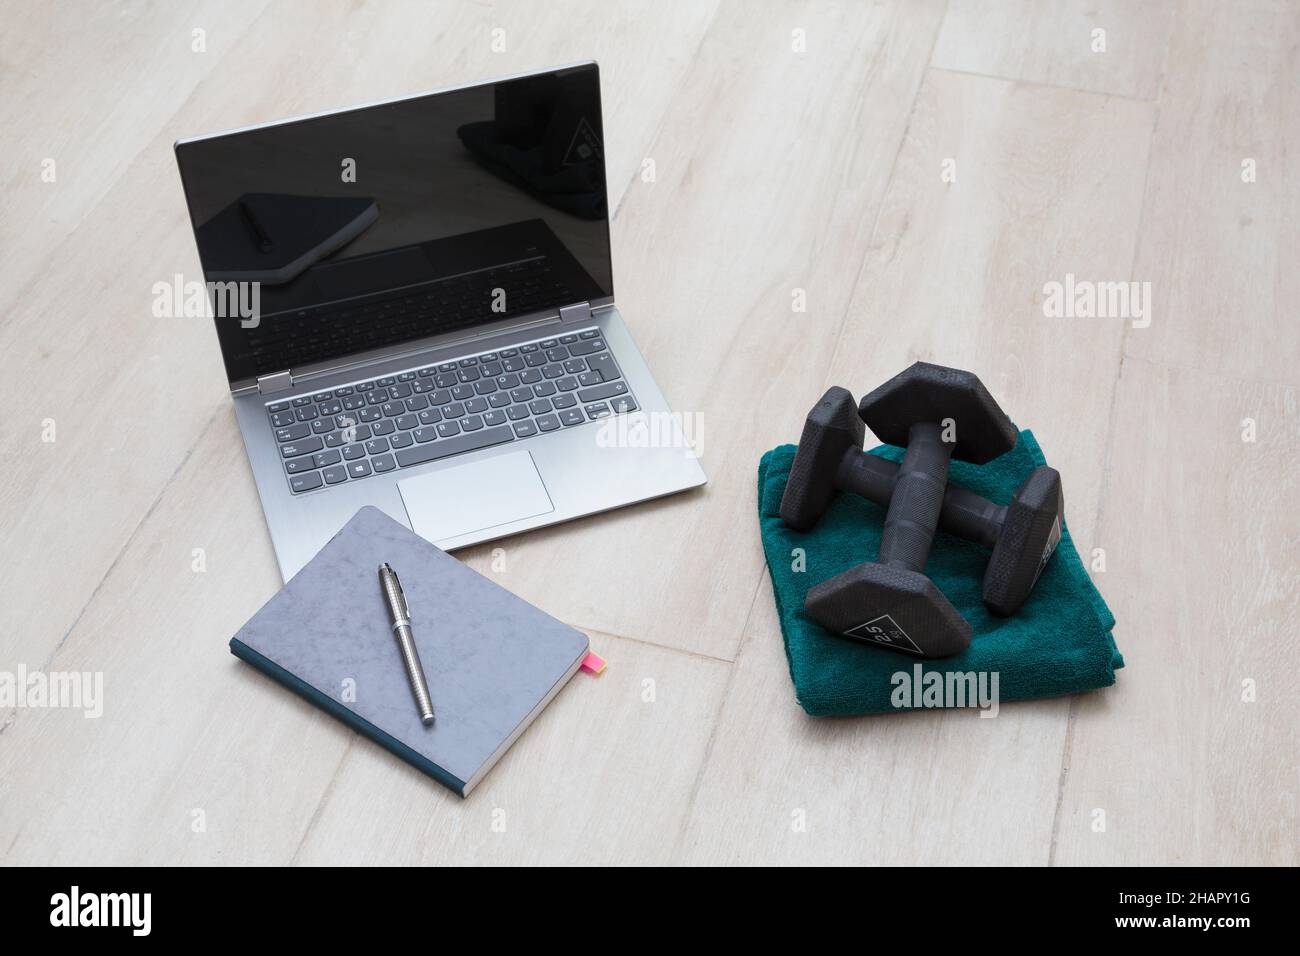 A laptop, a notebook and a pair of dumbbells Stock Photo